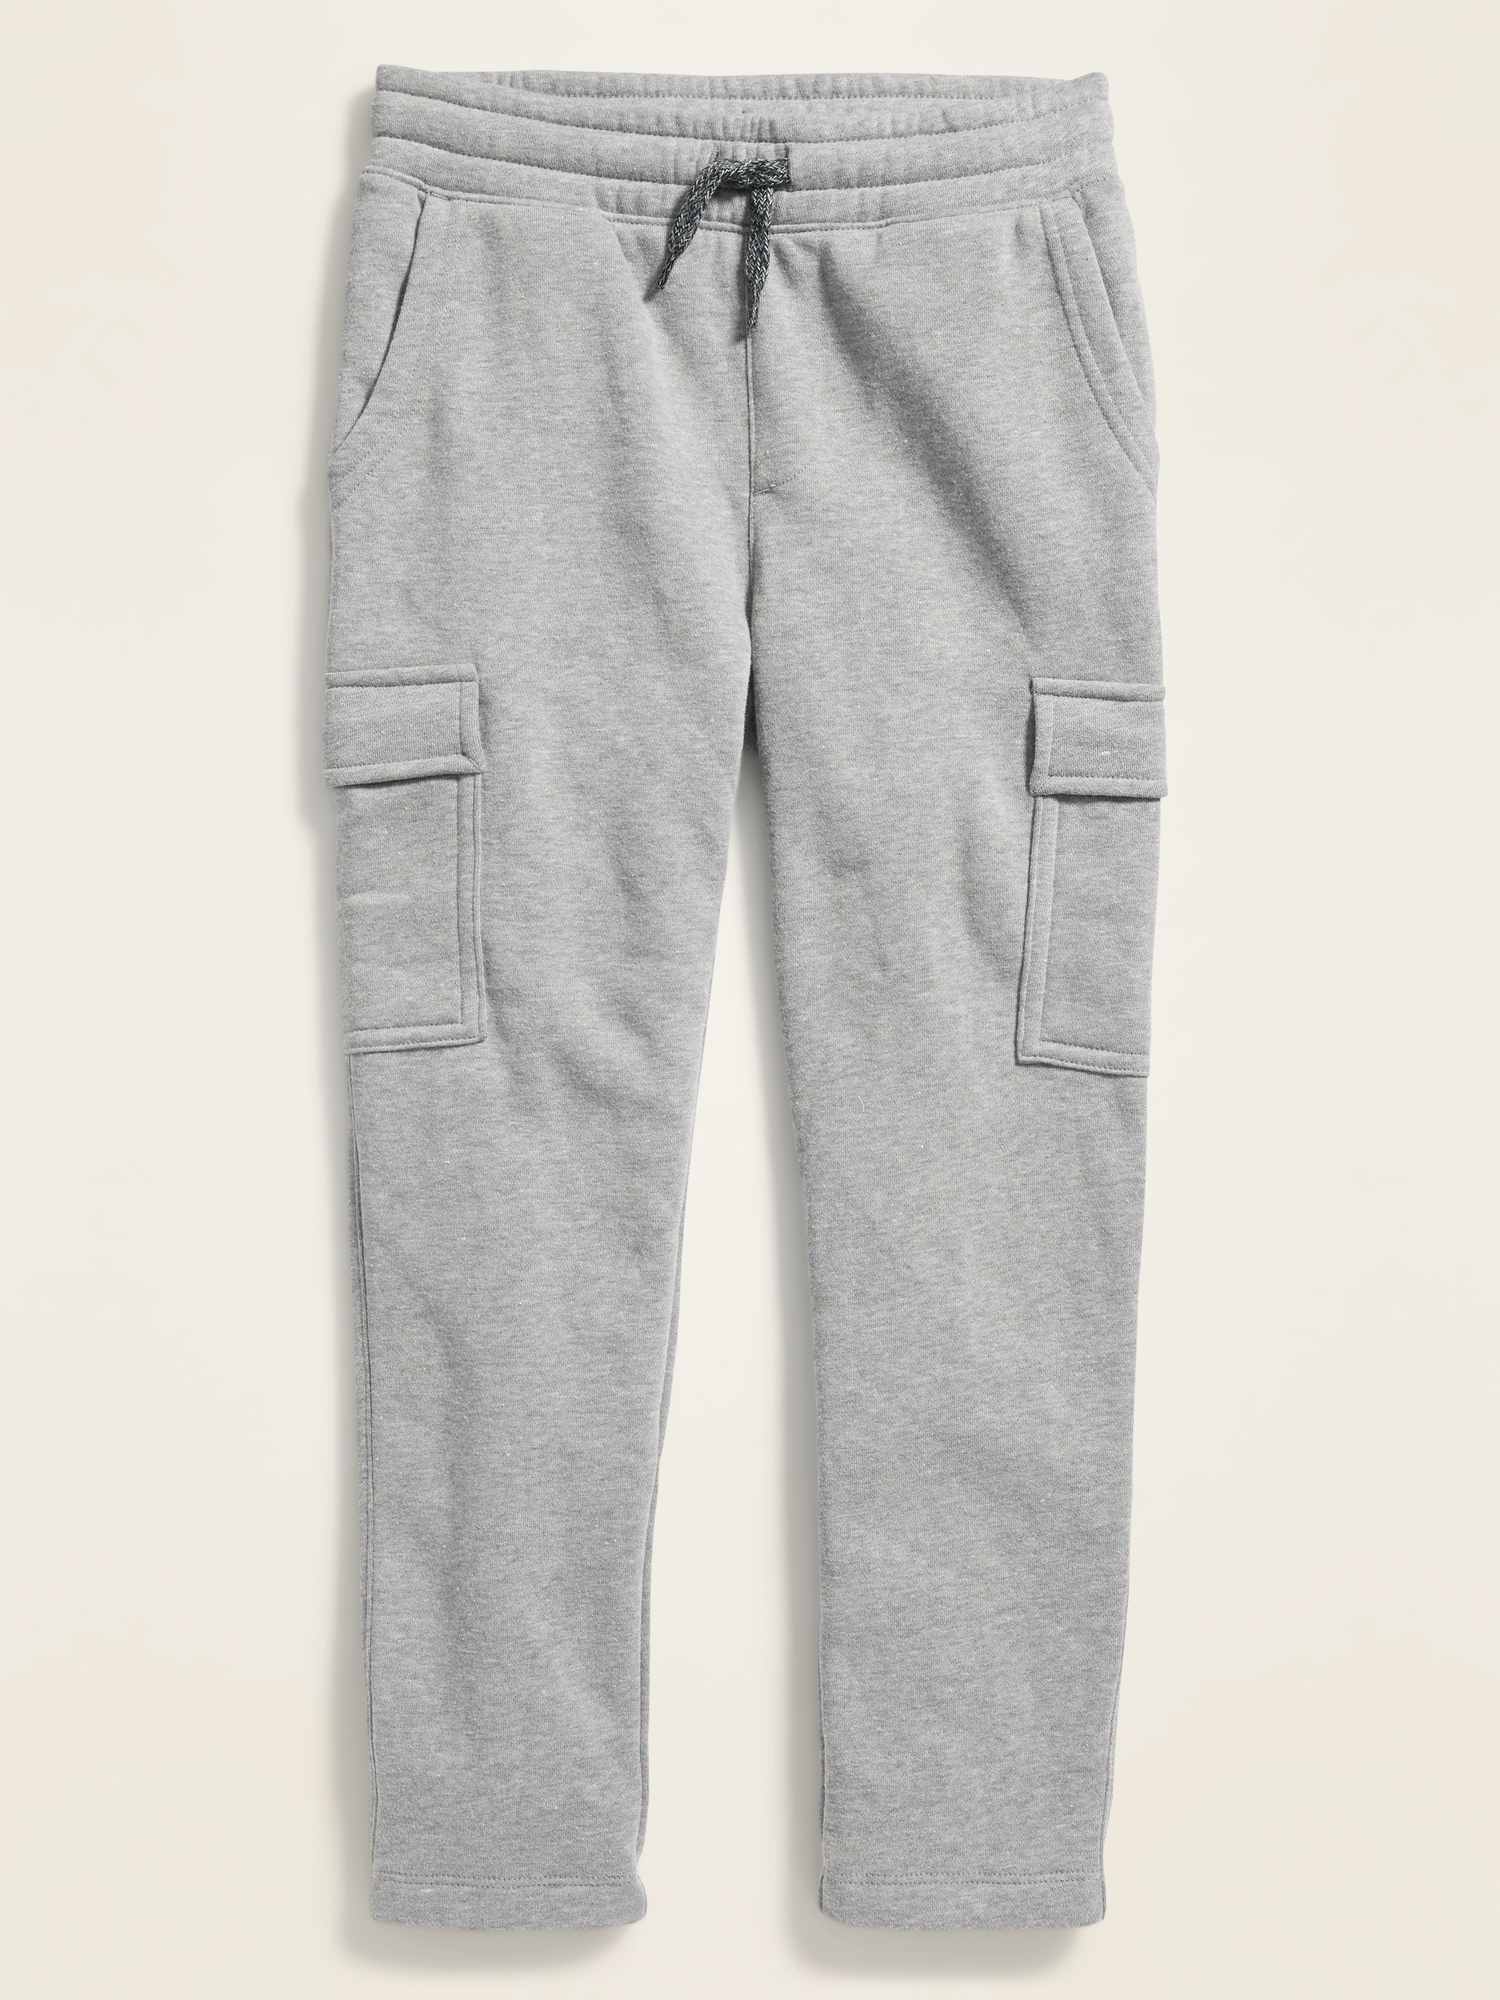 For Old Cargo Navy | Boys Tapered Sweatpants